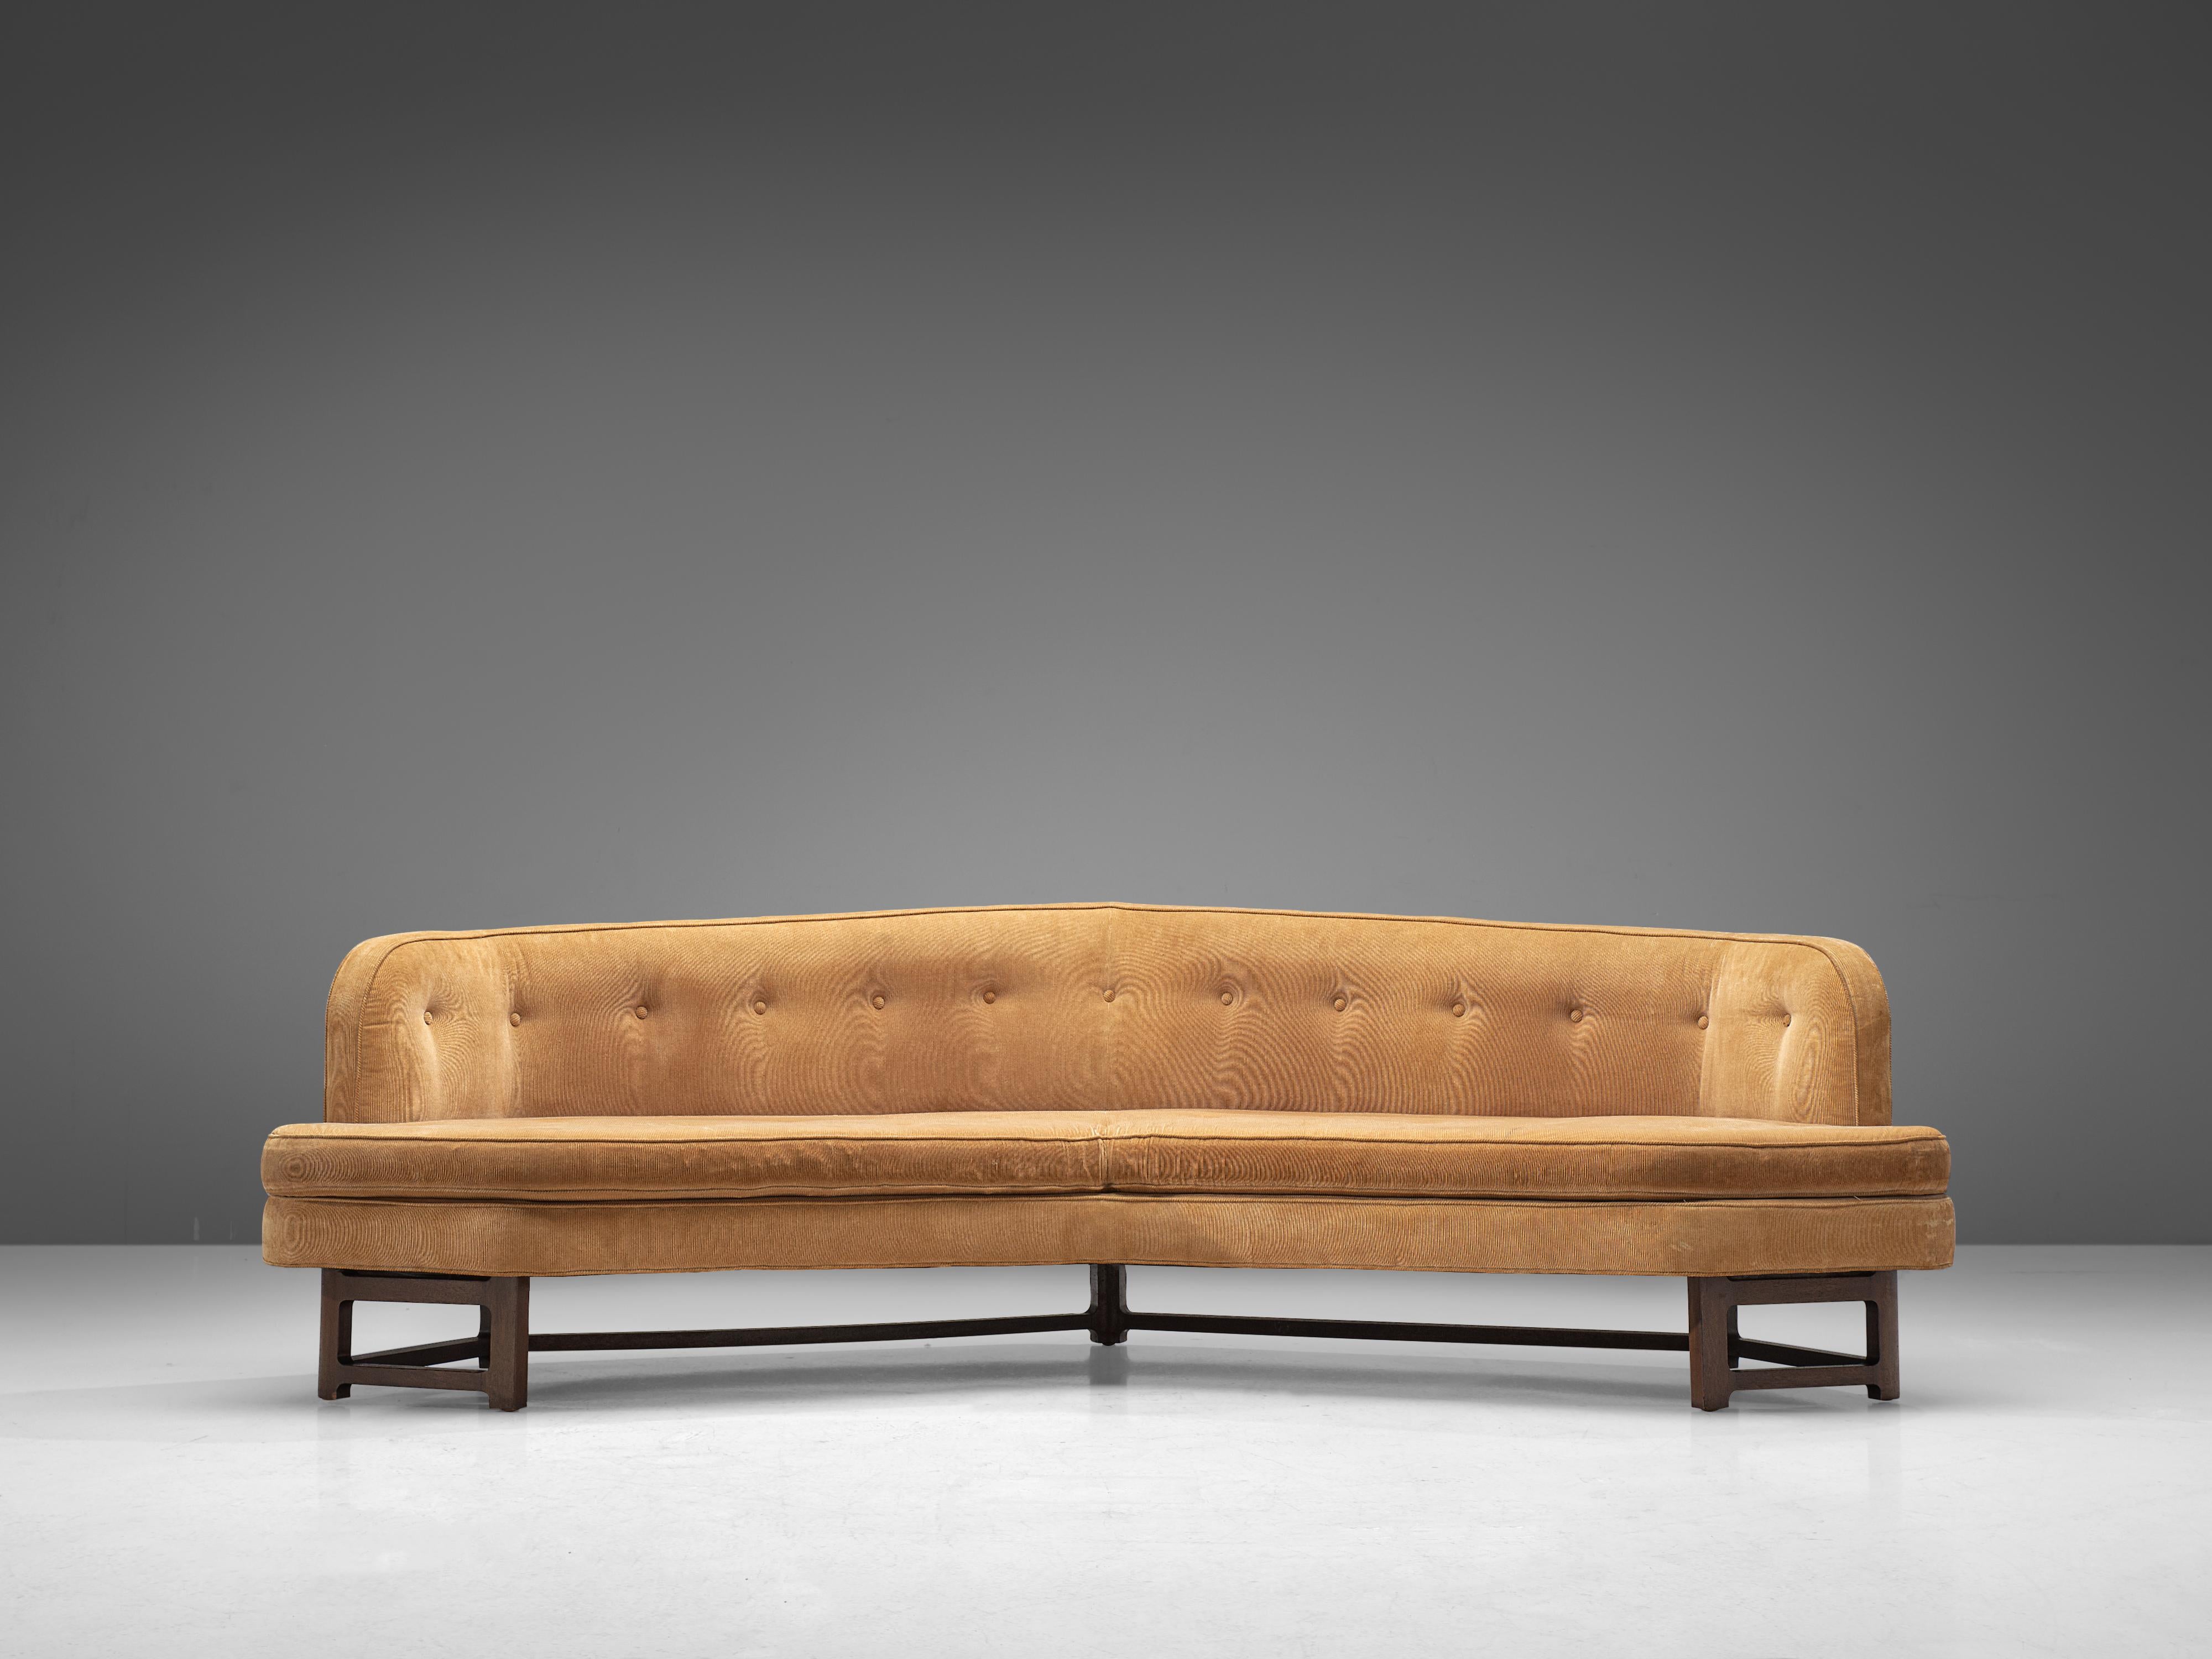 Edward Wormley for Dunbar, Janus sofa model '6392A', yellow fabric, mahogany, United States, 1960s

Wide angled Janus' sofa by Edward Wormley. This sofa has a modern shape and sinuous lines which create a comfortable and appealing look. The open